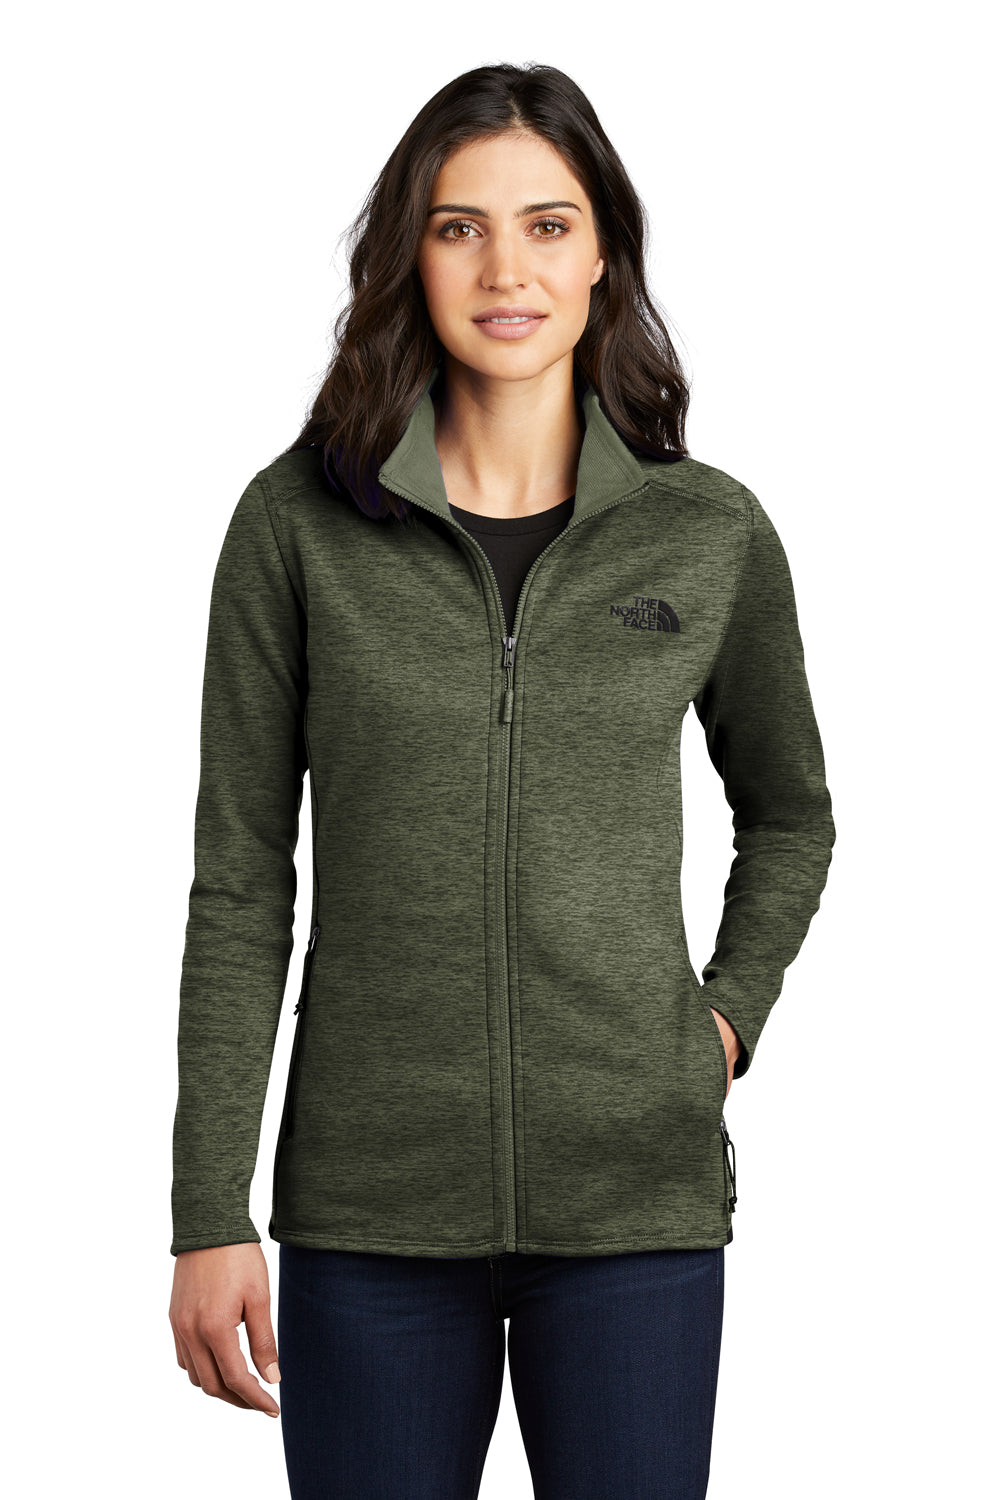 The North Face Womens Skyline Fleece Full Zip Jacket Heather Four Leaf Clover Green Front